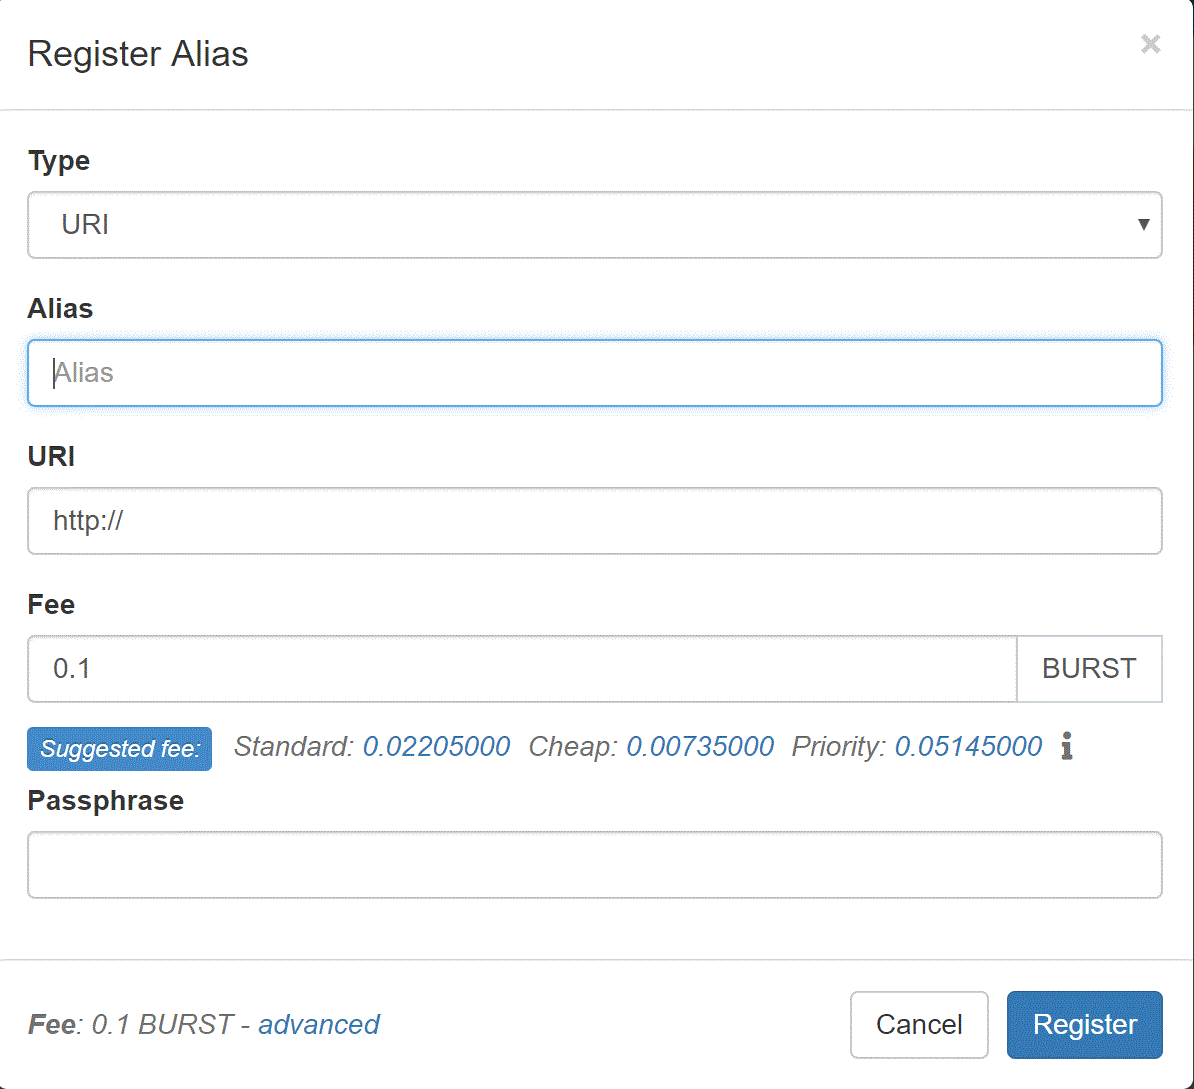 Image showing fields for registering an alias using the Burstcoin wallet